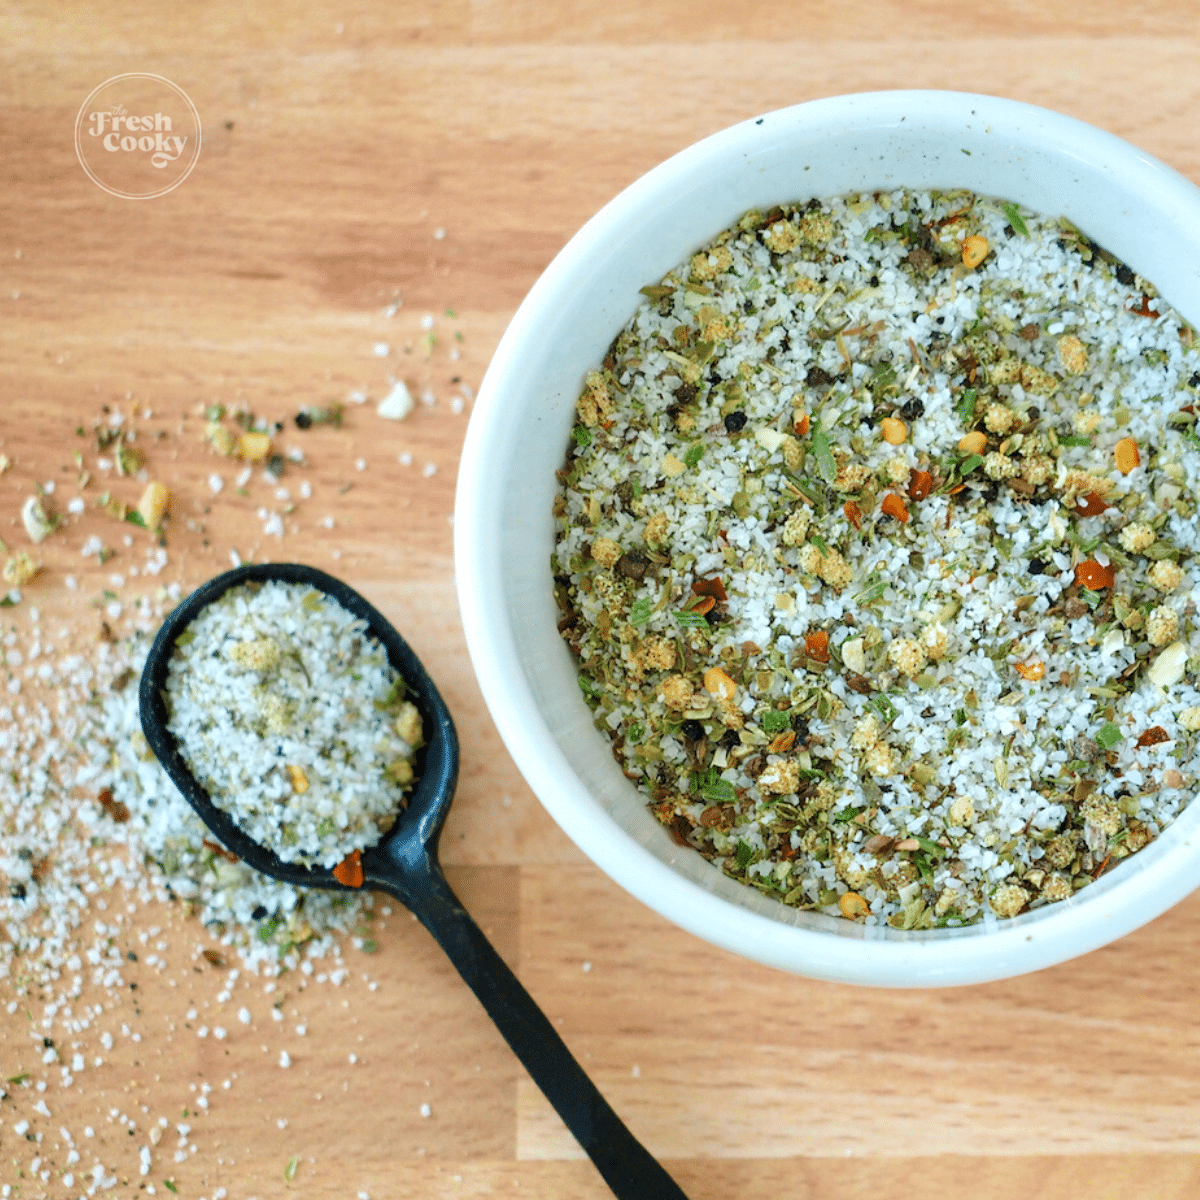 Square image of Carrabba's Grill Seasoning mix with spoon on table and seasoning in bowl.